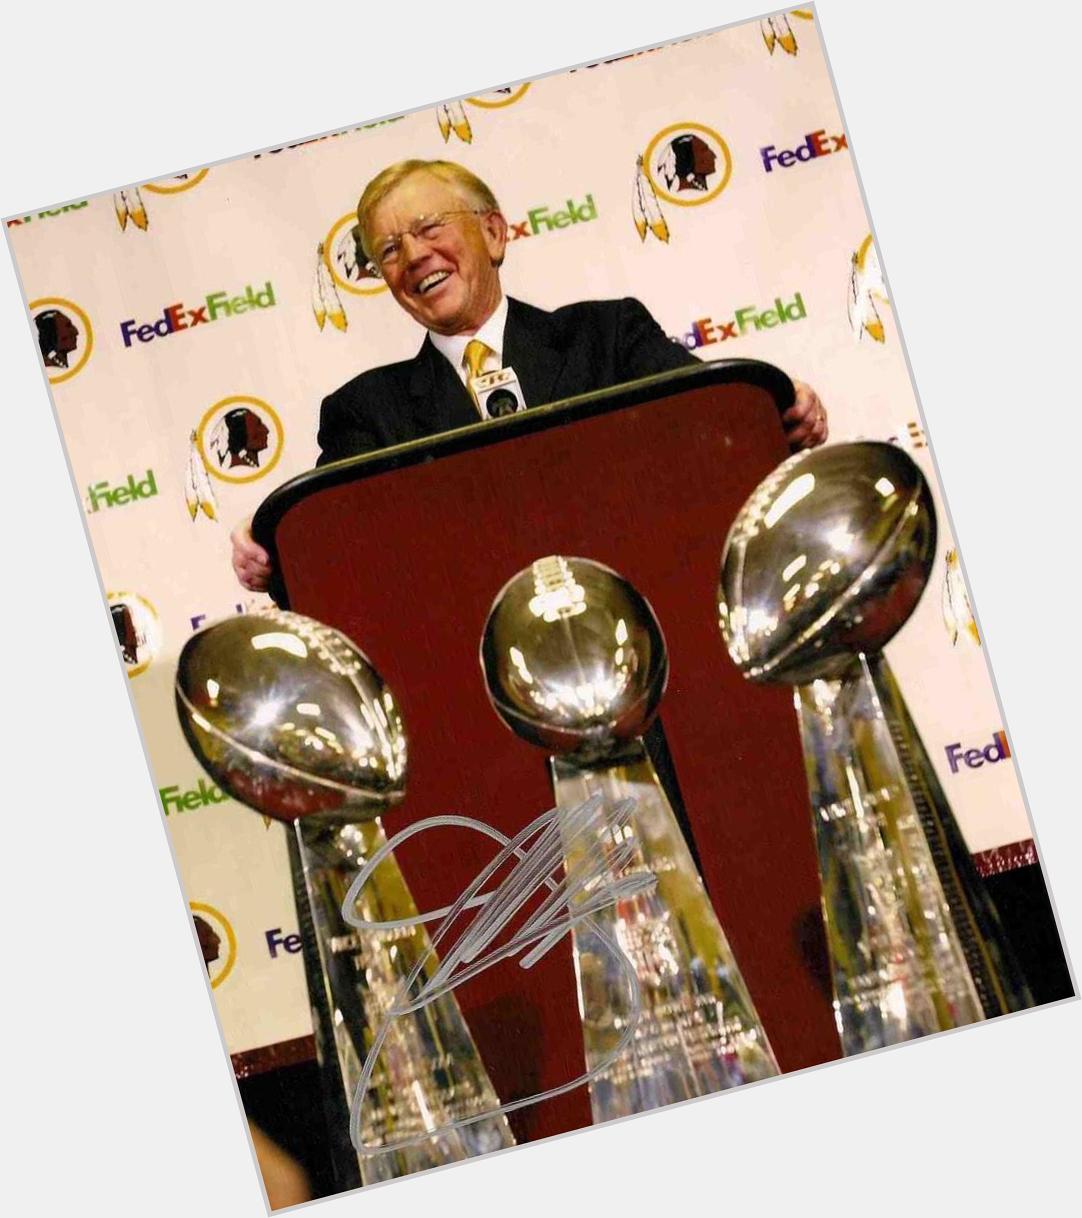 Happy belated 74th Birthday to the greatest coach in NFL history. Joe Gibbs!  